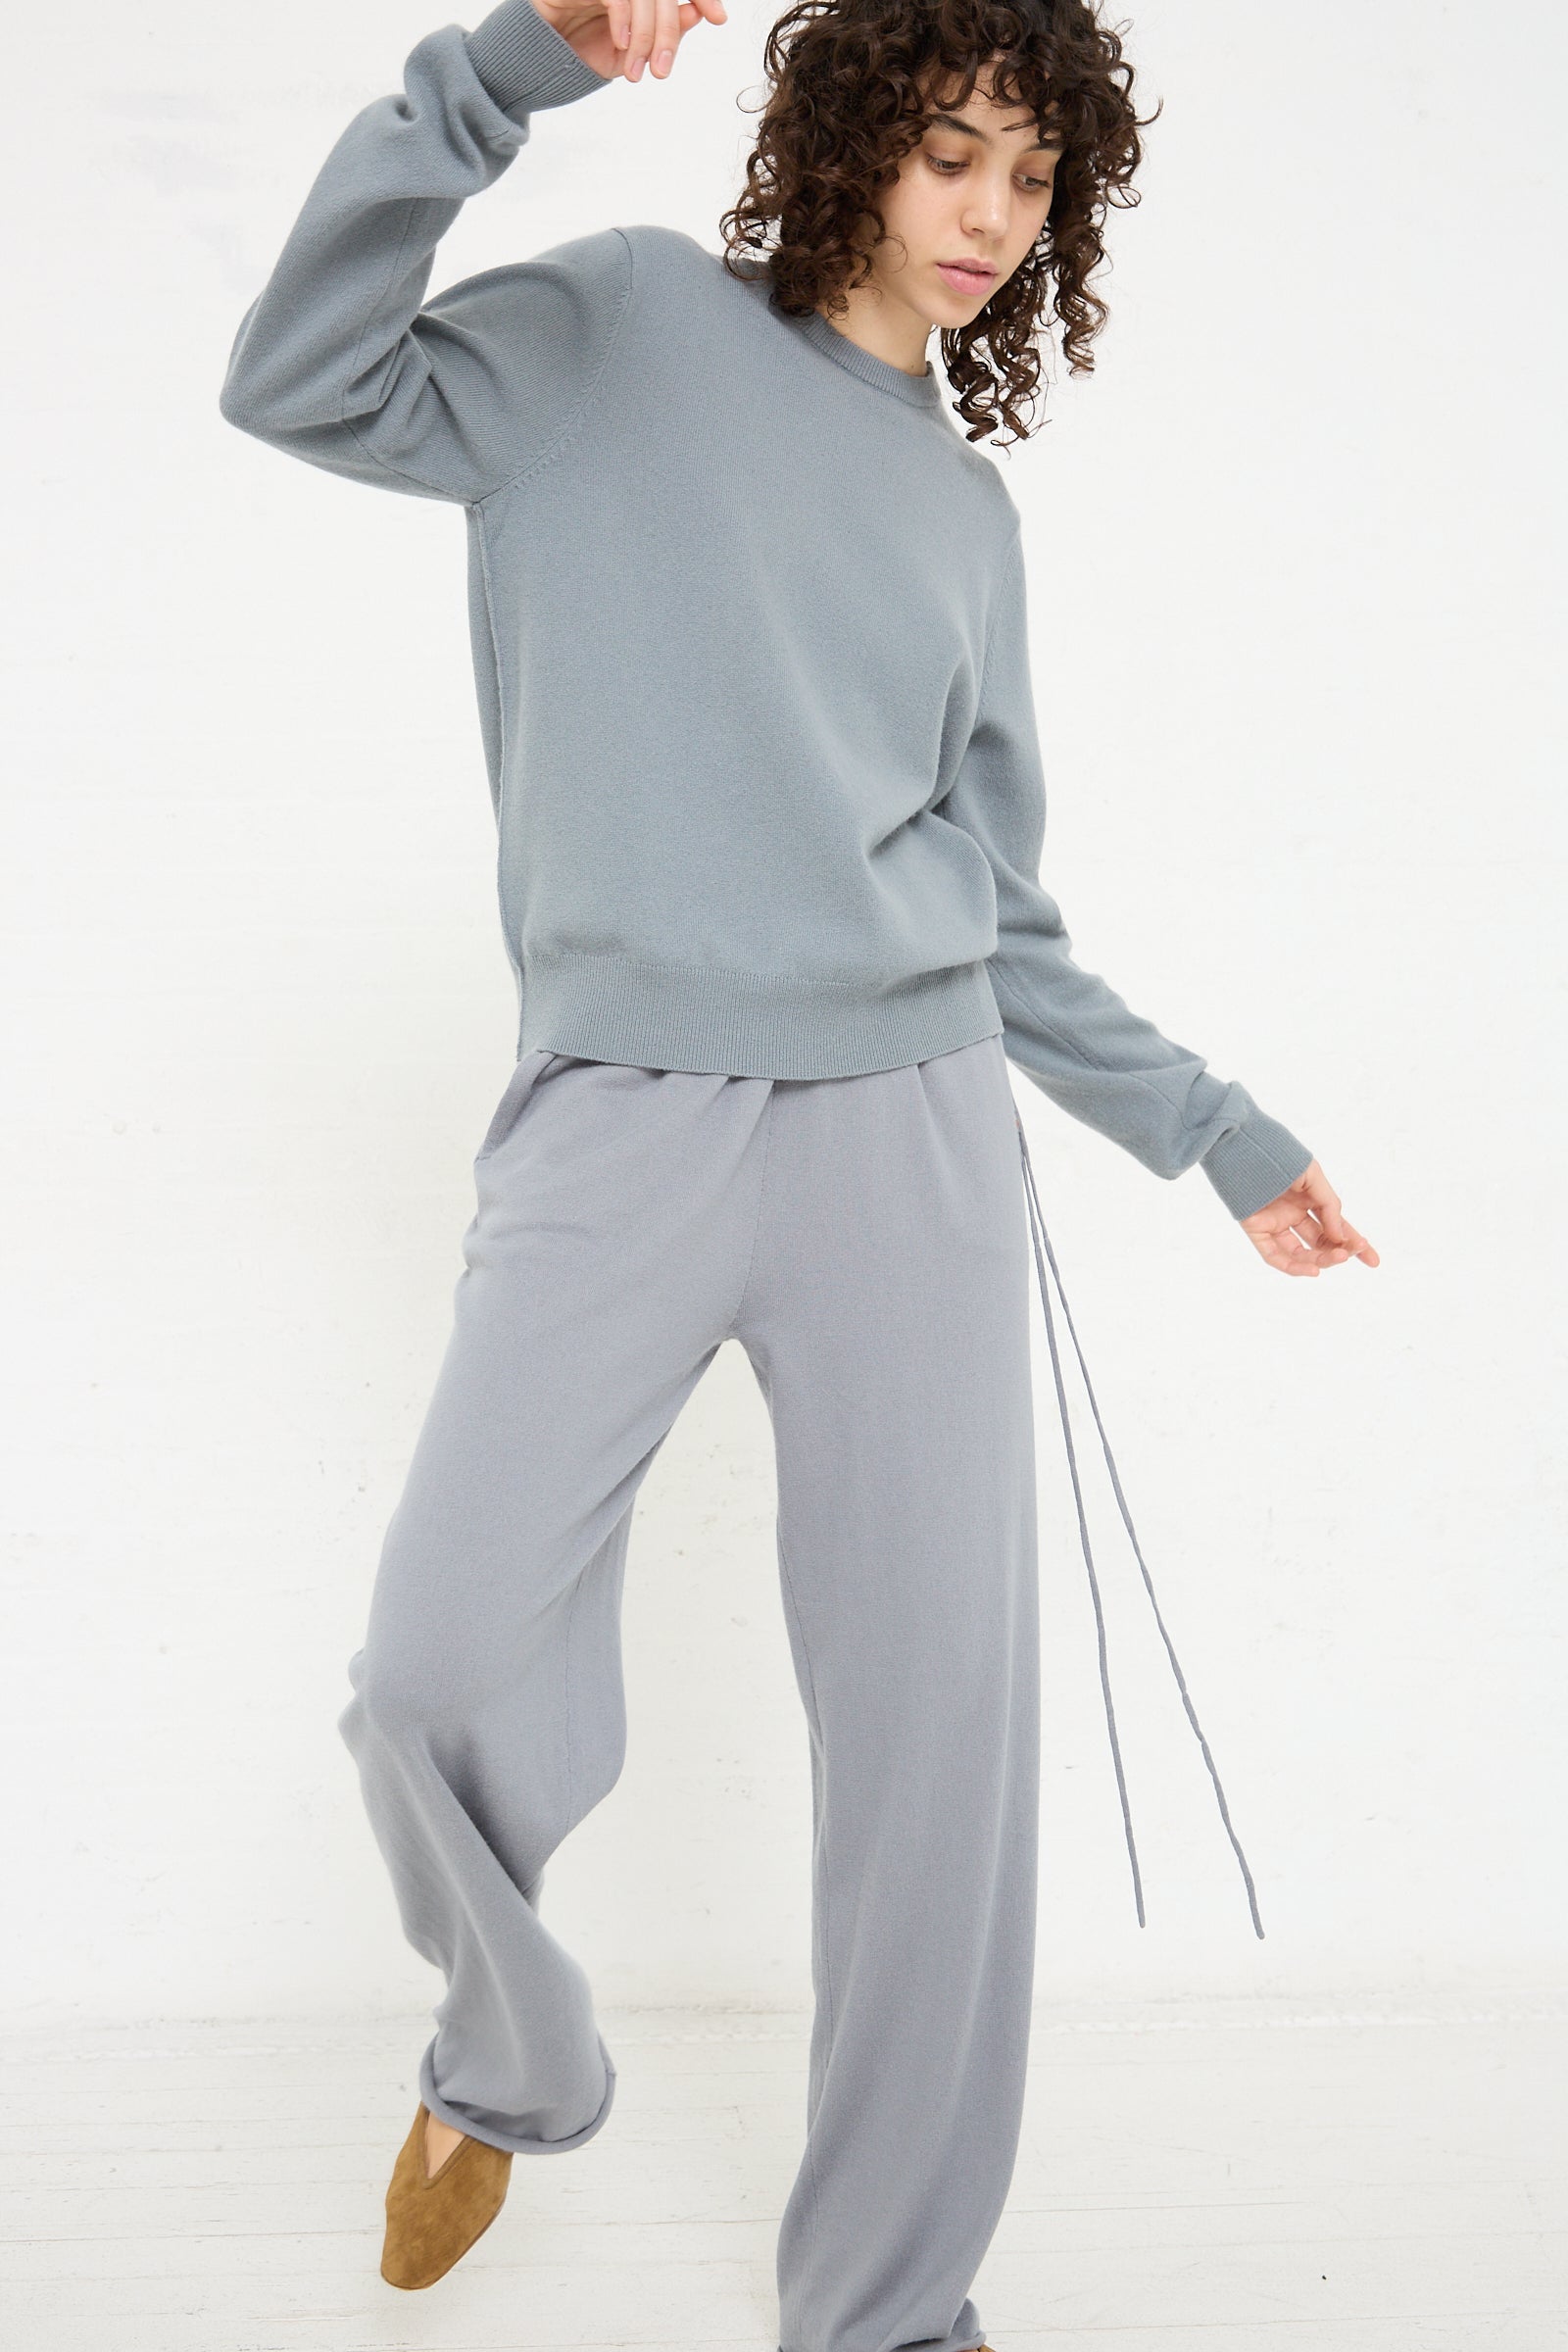 The model is wearing Extreme Cashmere's No. 278 Judo Pant in Sage and a grey sweatshirt for a comfortable look.